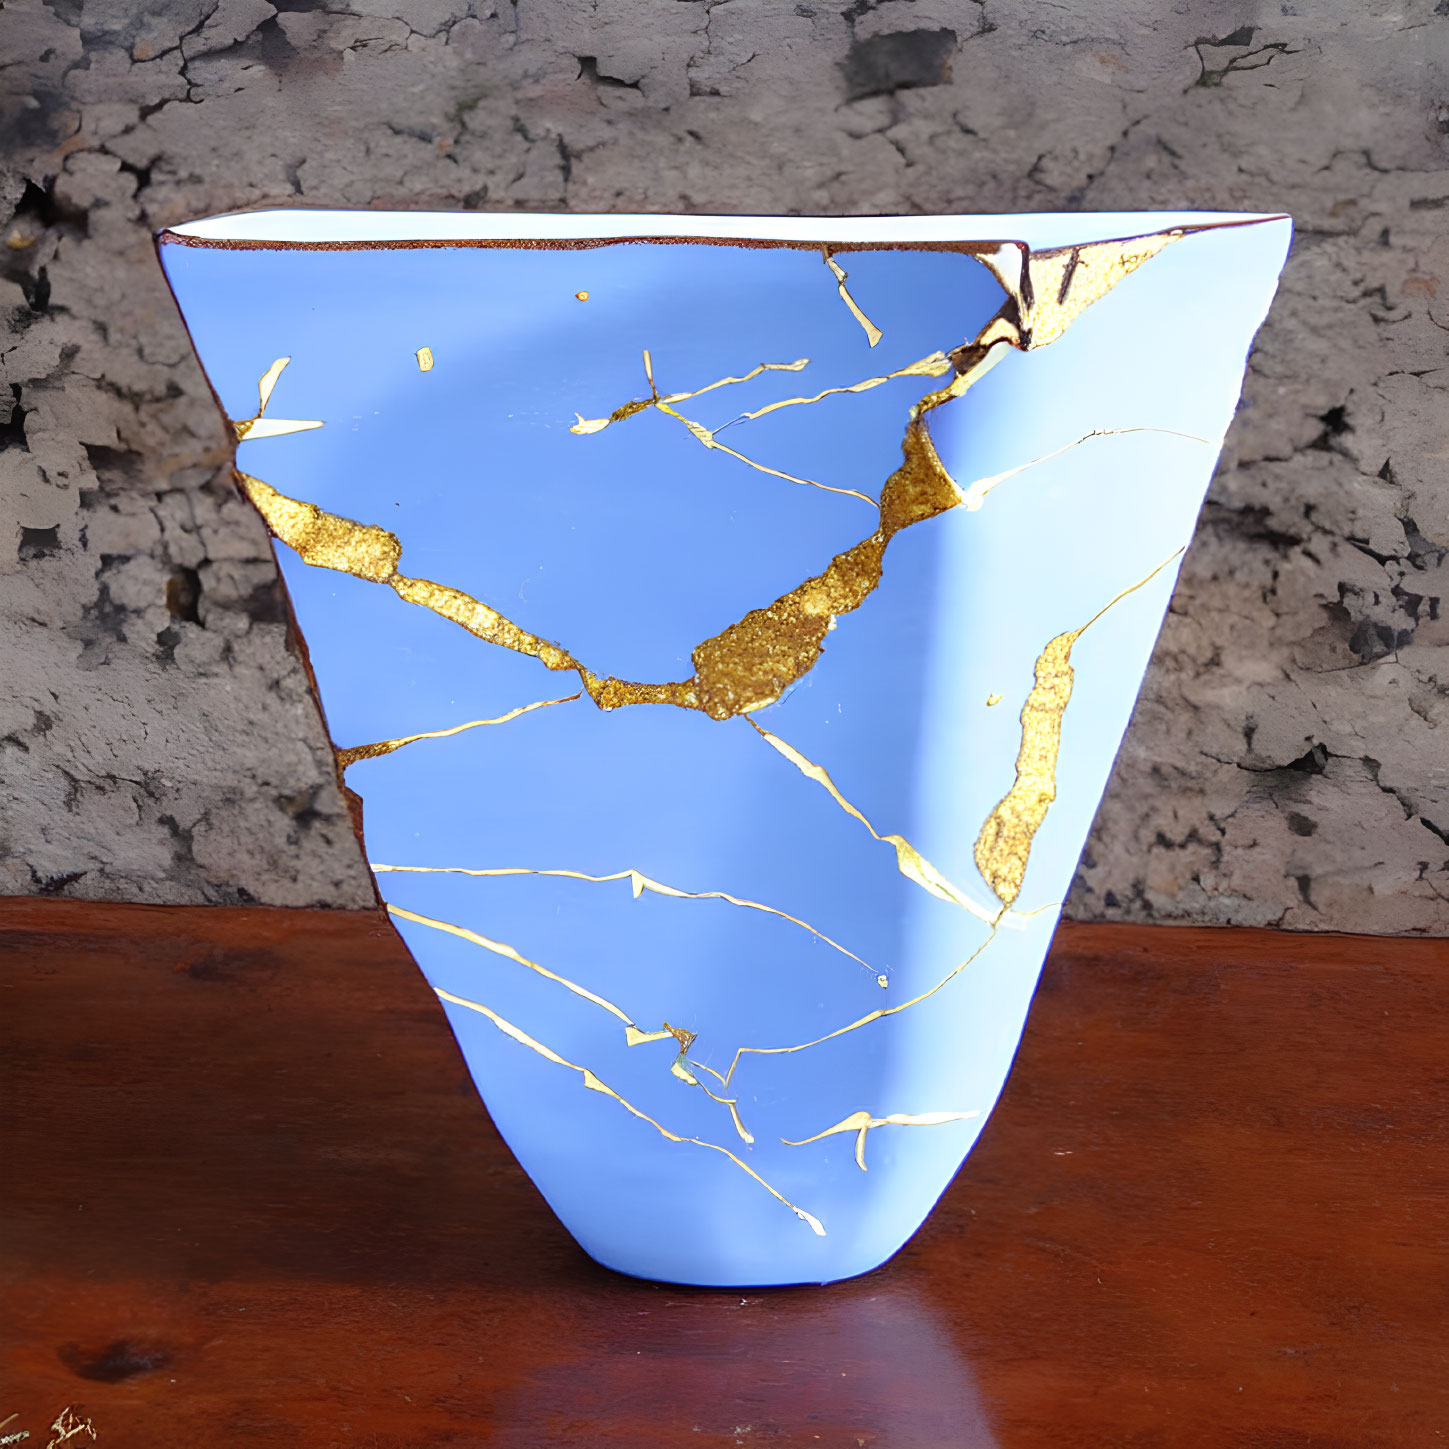 Blue Ceramic Vase with Gold Kintsugi Repair on Wooden Surface